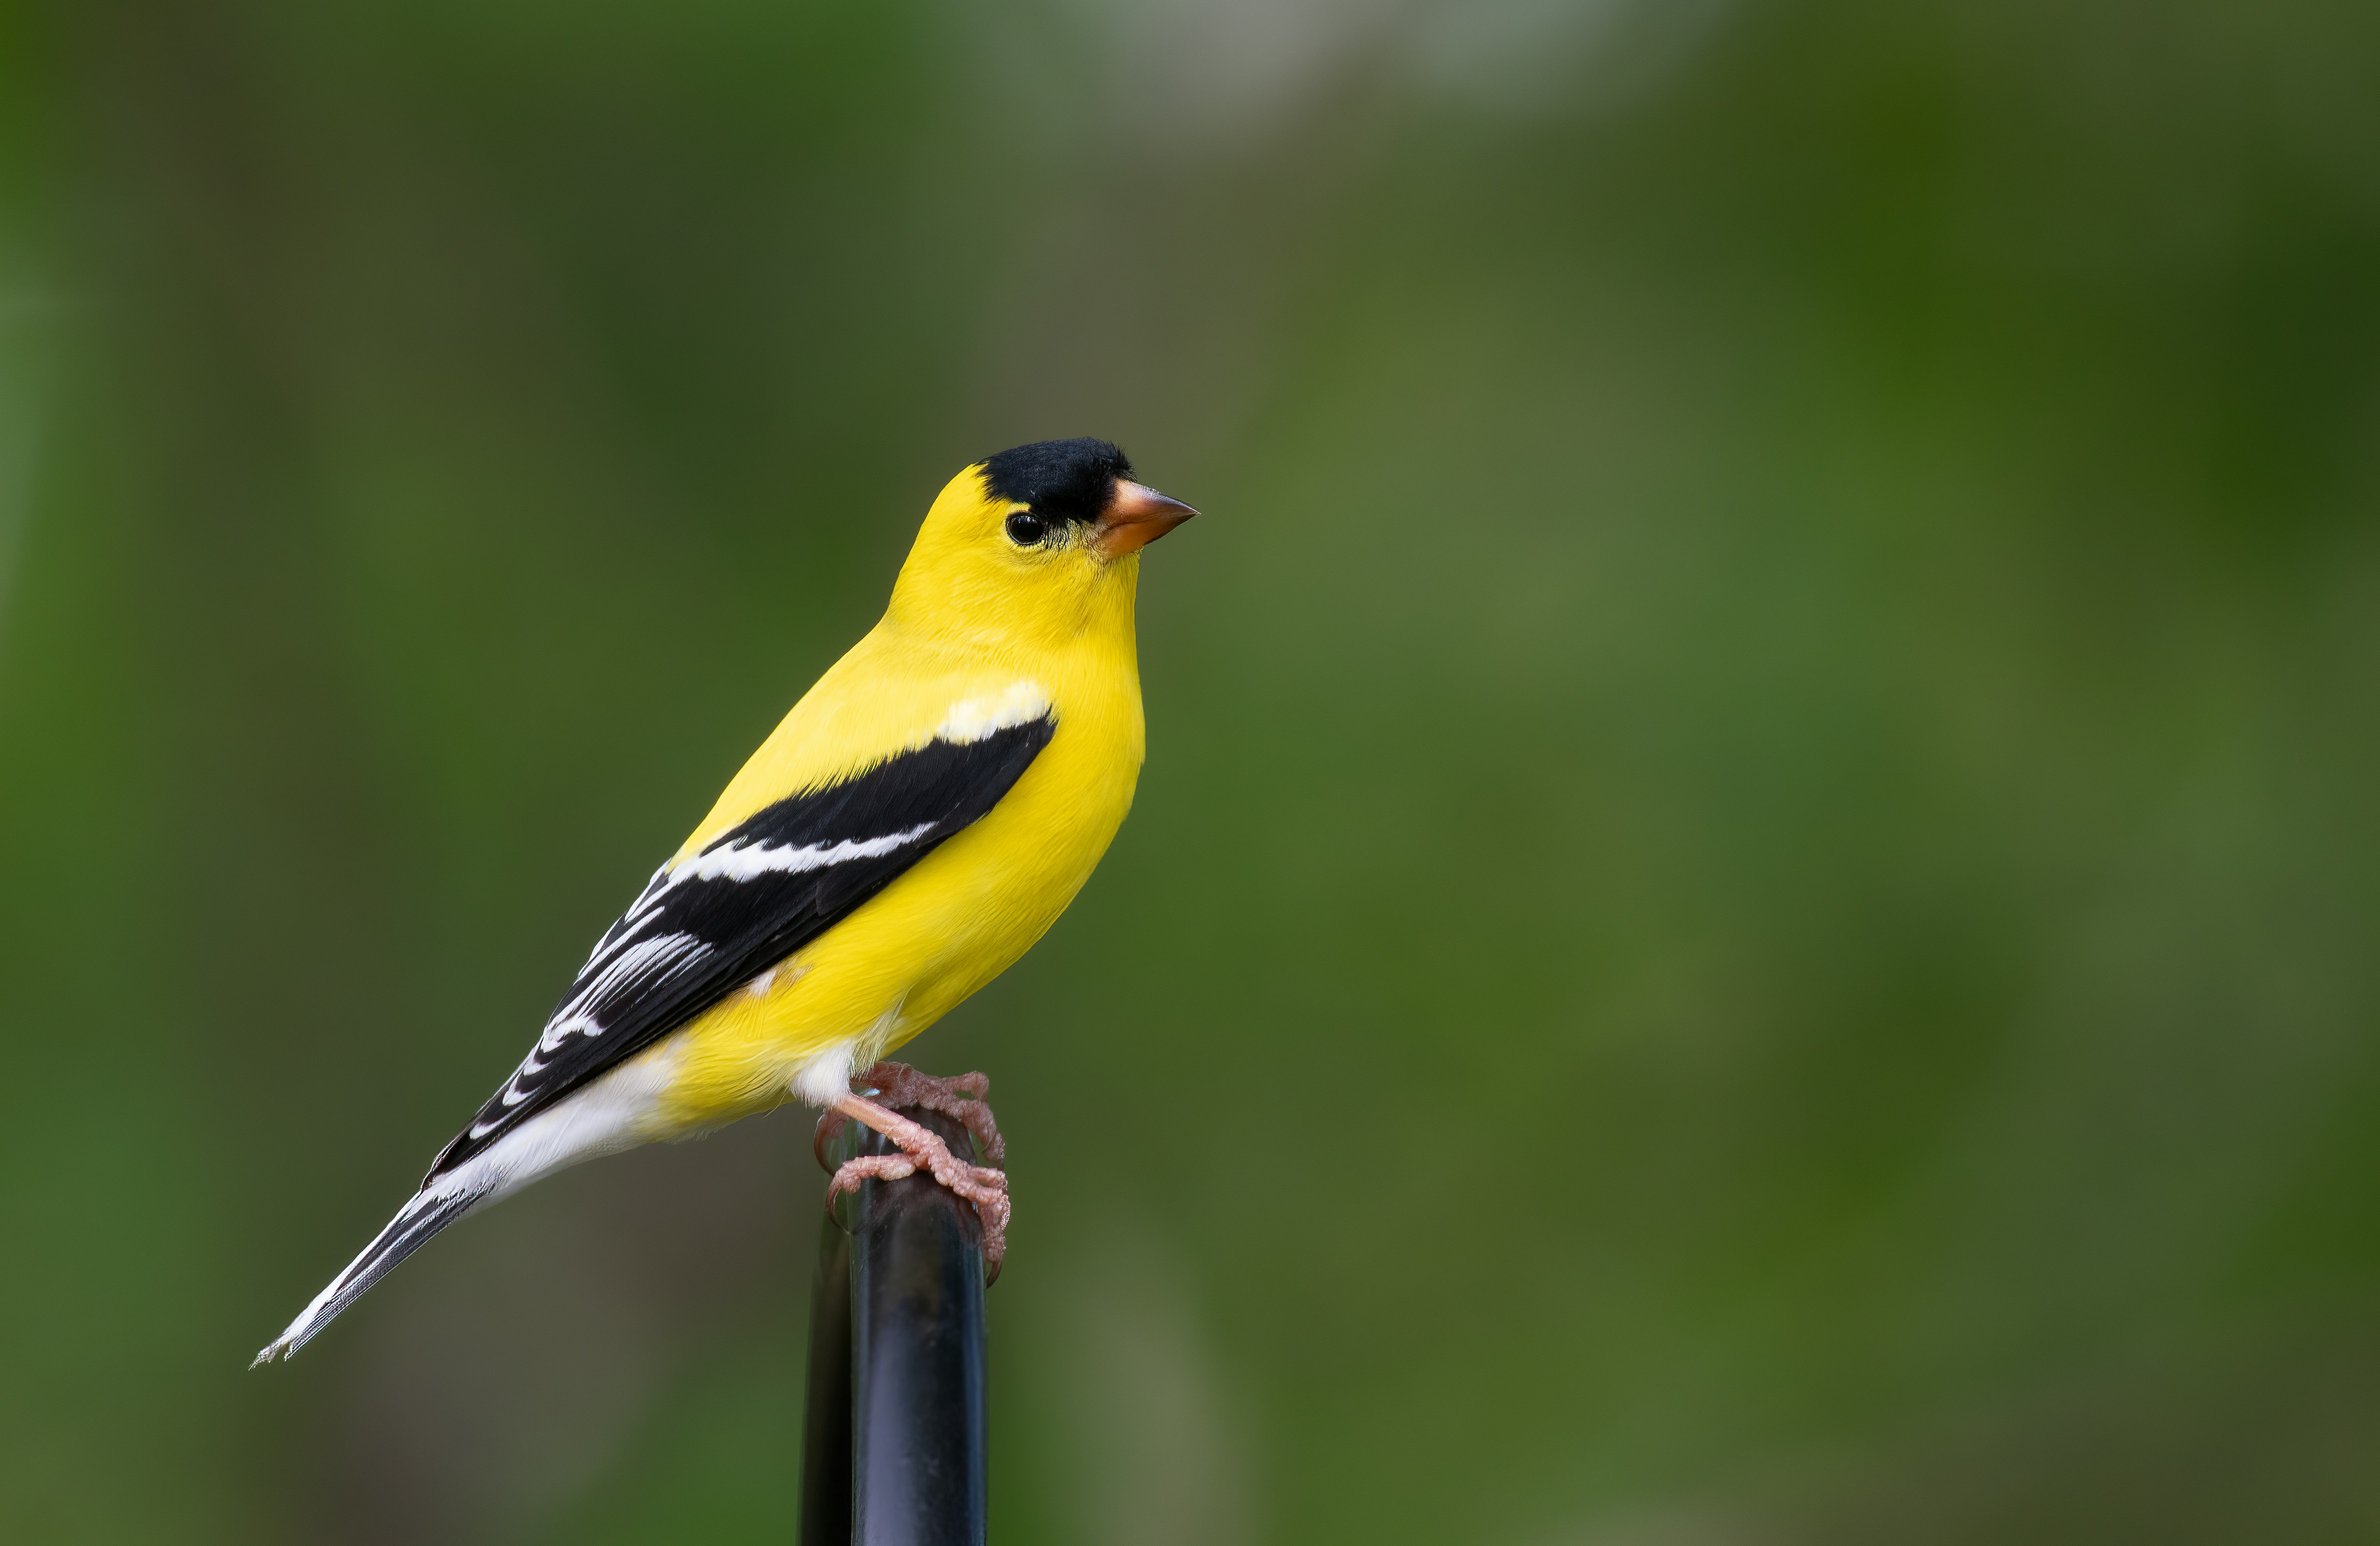 yellow and black bird on brown wooden stick